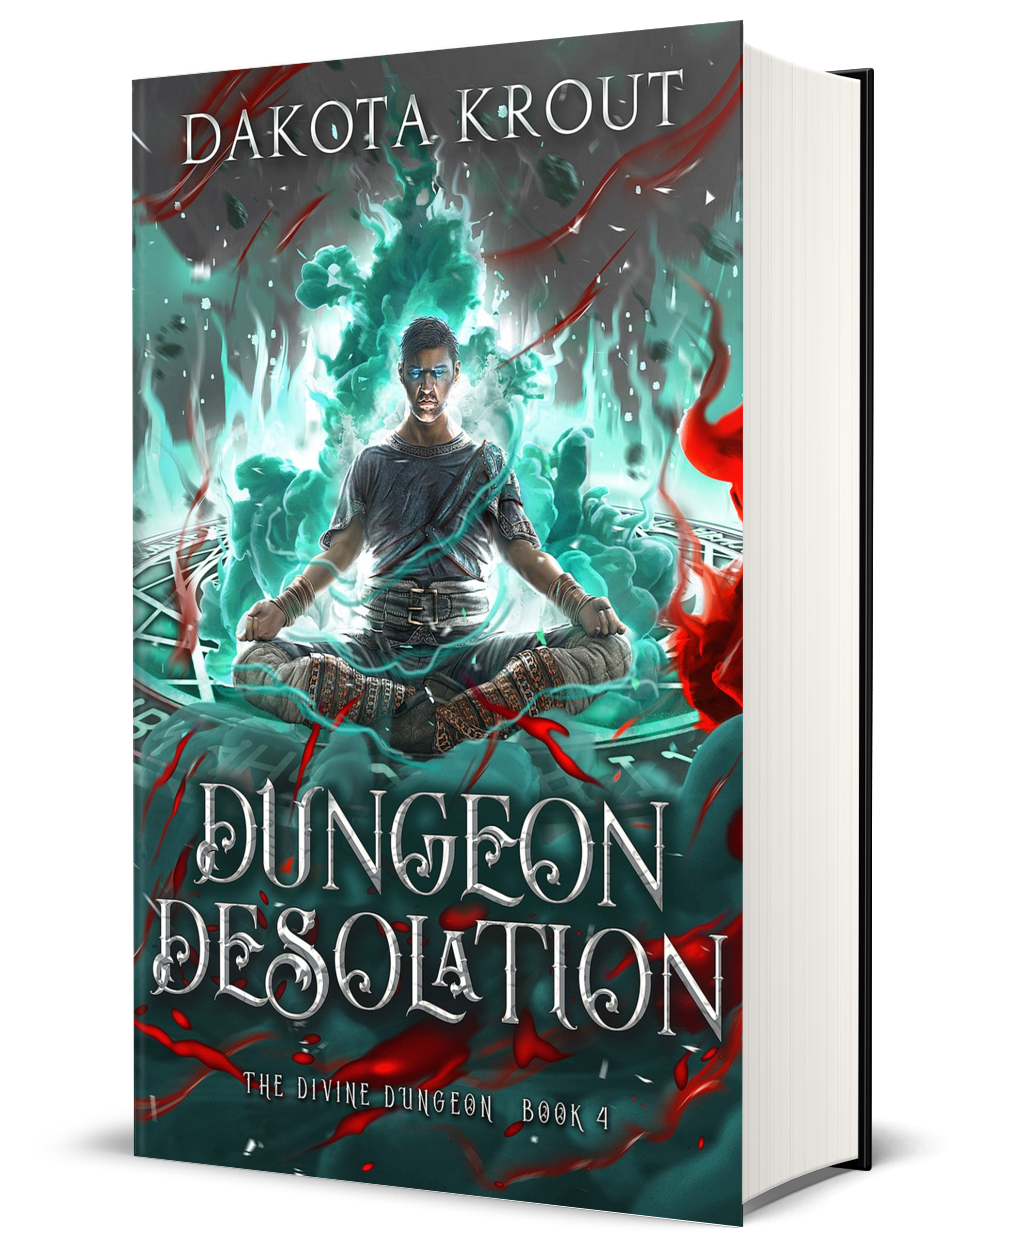 Dungeon Desolation Signed Hardcover